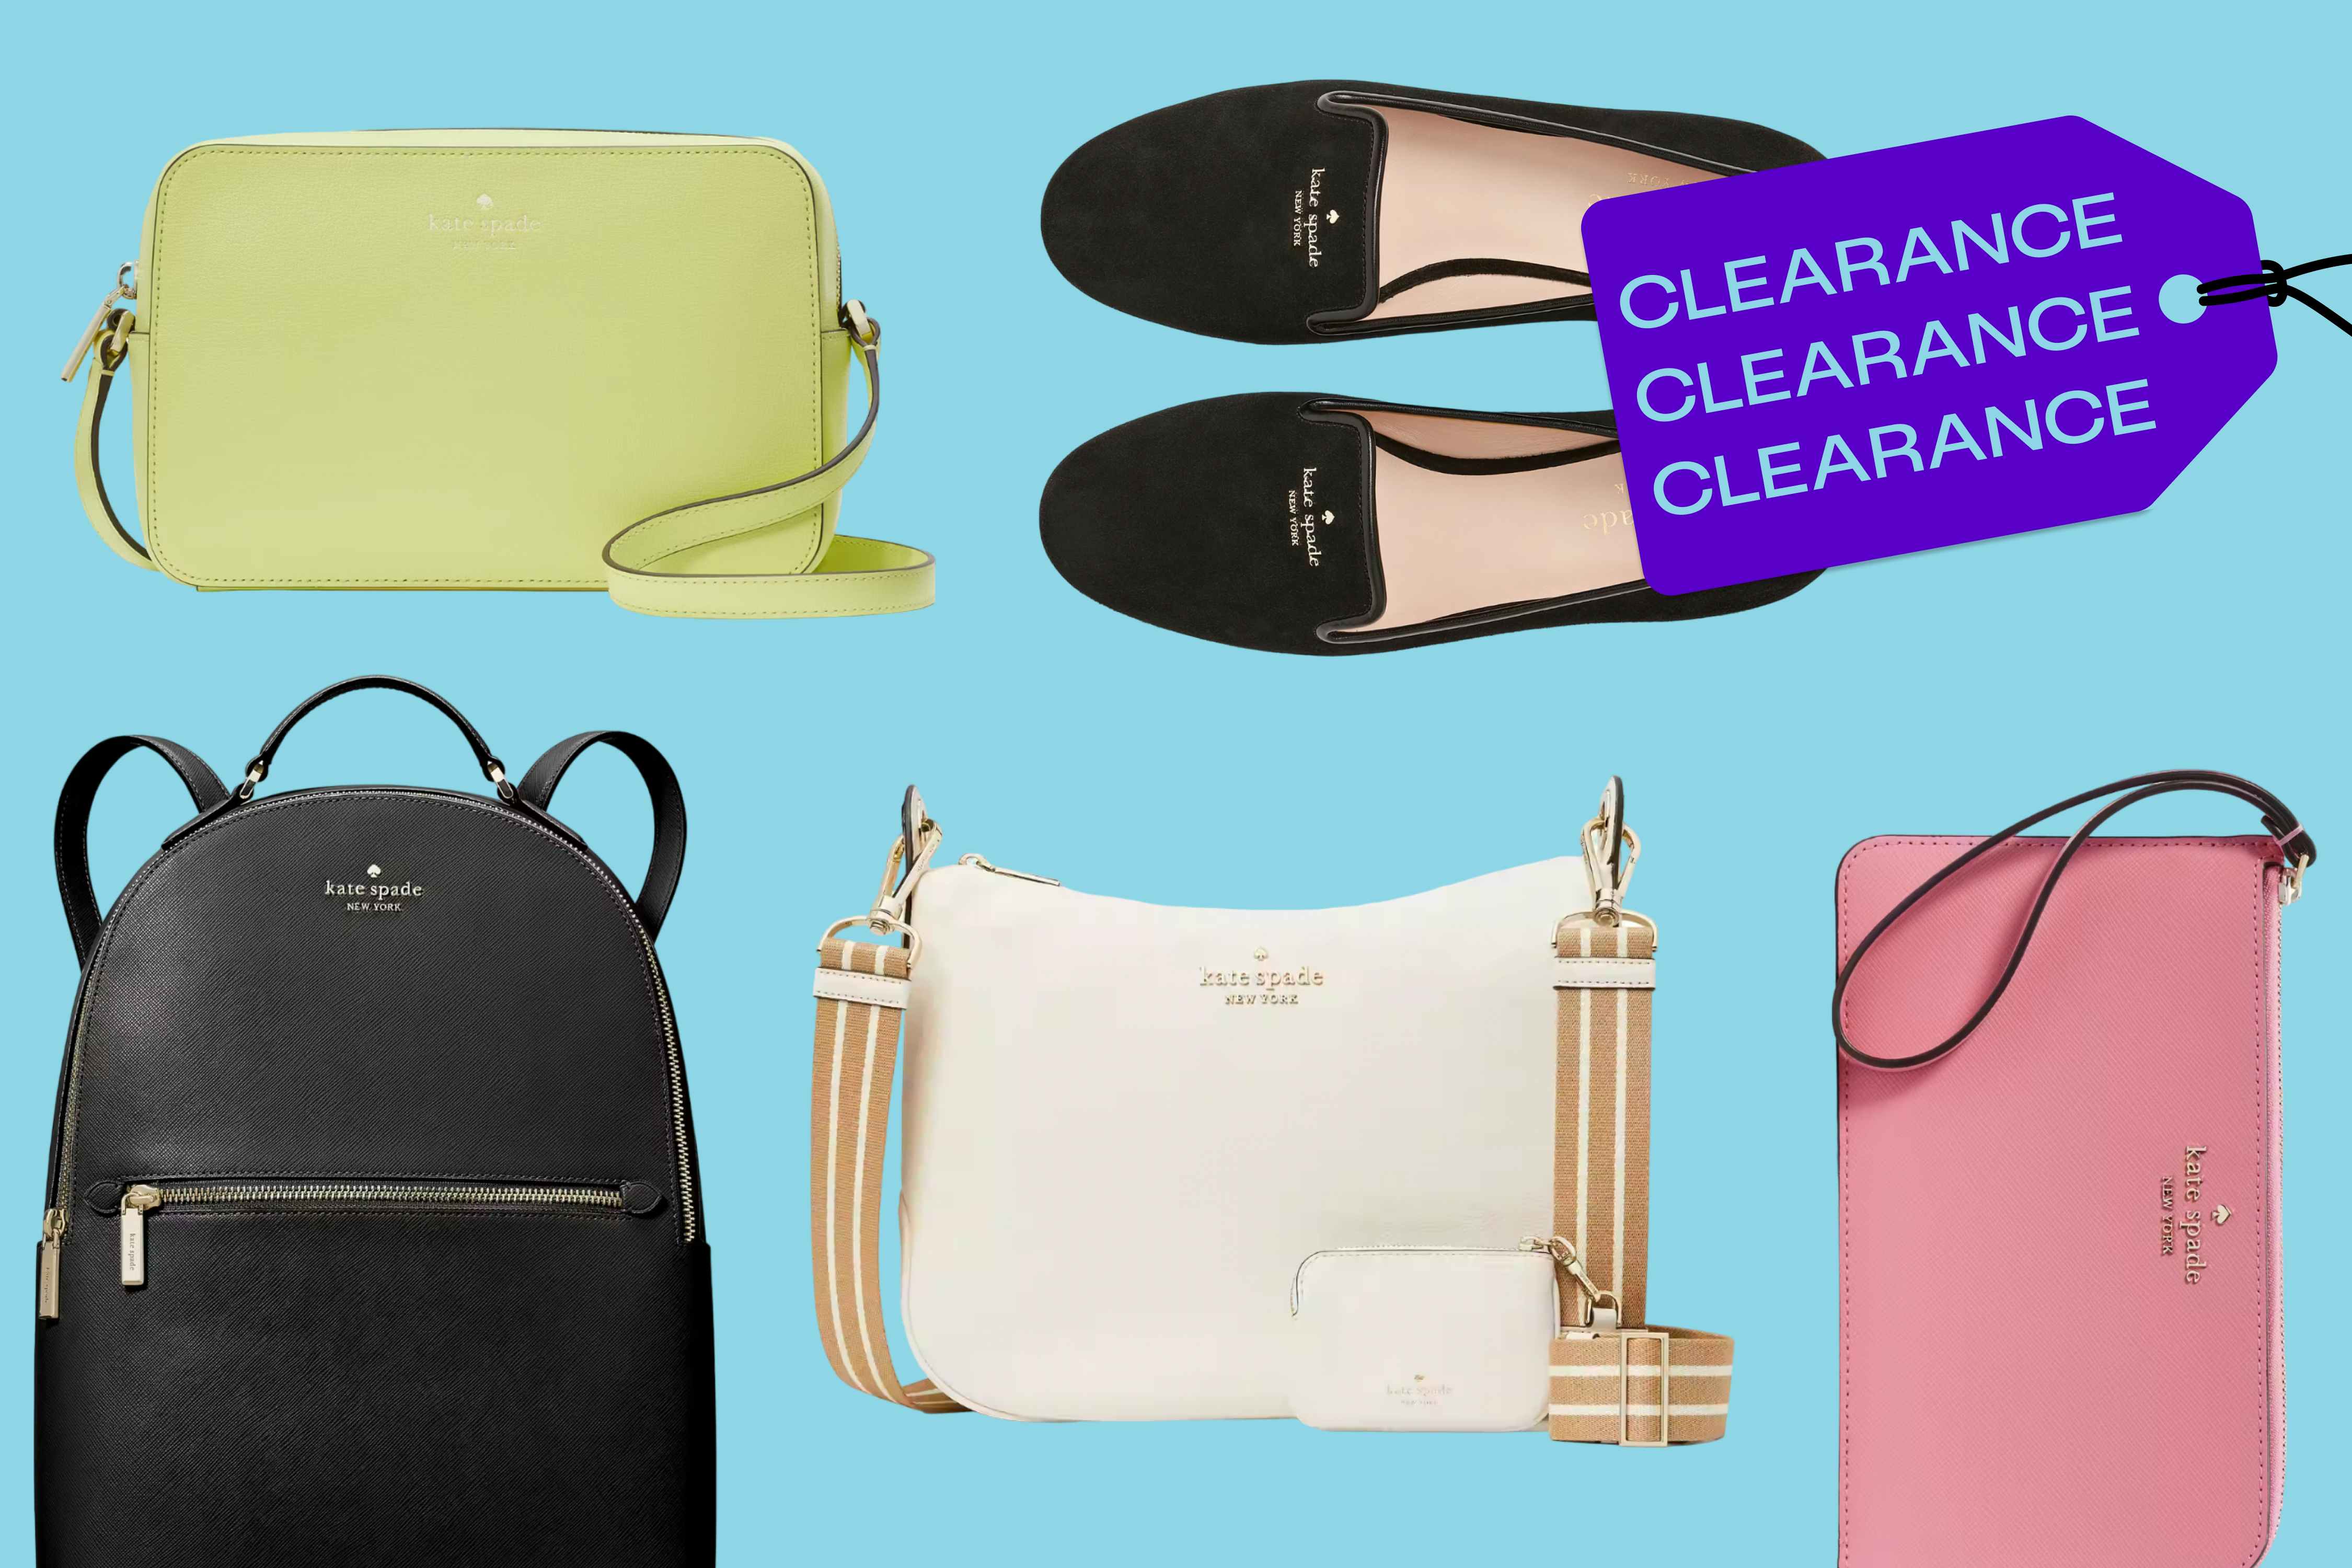 Kate Spade Outlet Is on Clearance: $12 Earrings, $87 Leather Bag, and More